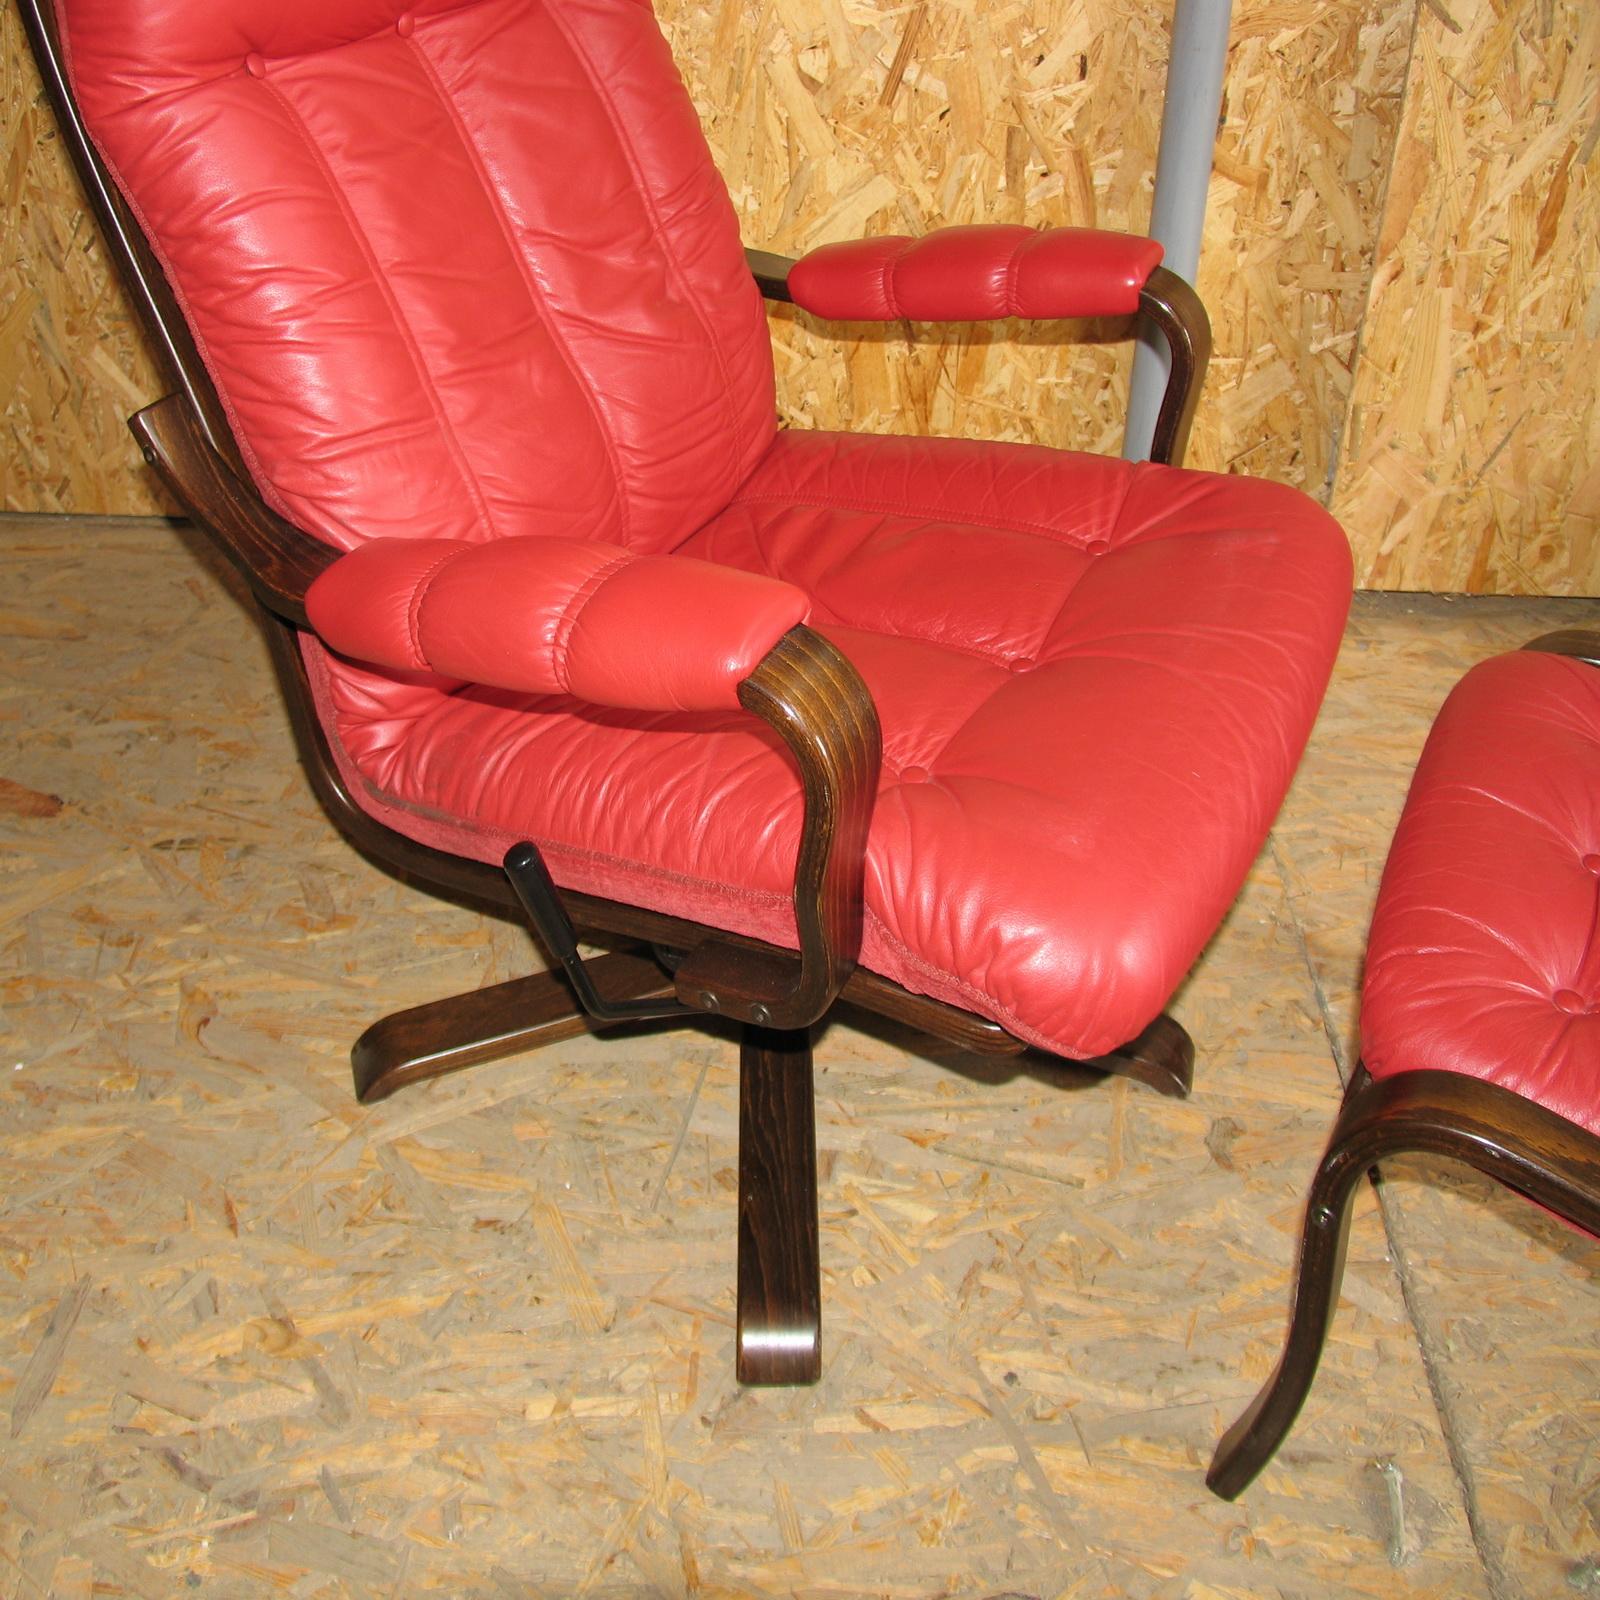 Göte Möbel Swivel Armchair with Footrest, Sweden, 1970s, 2 Sets Available For Sale 1